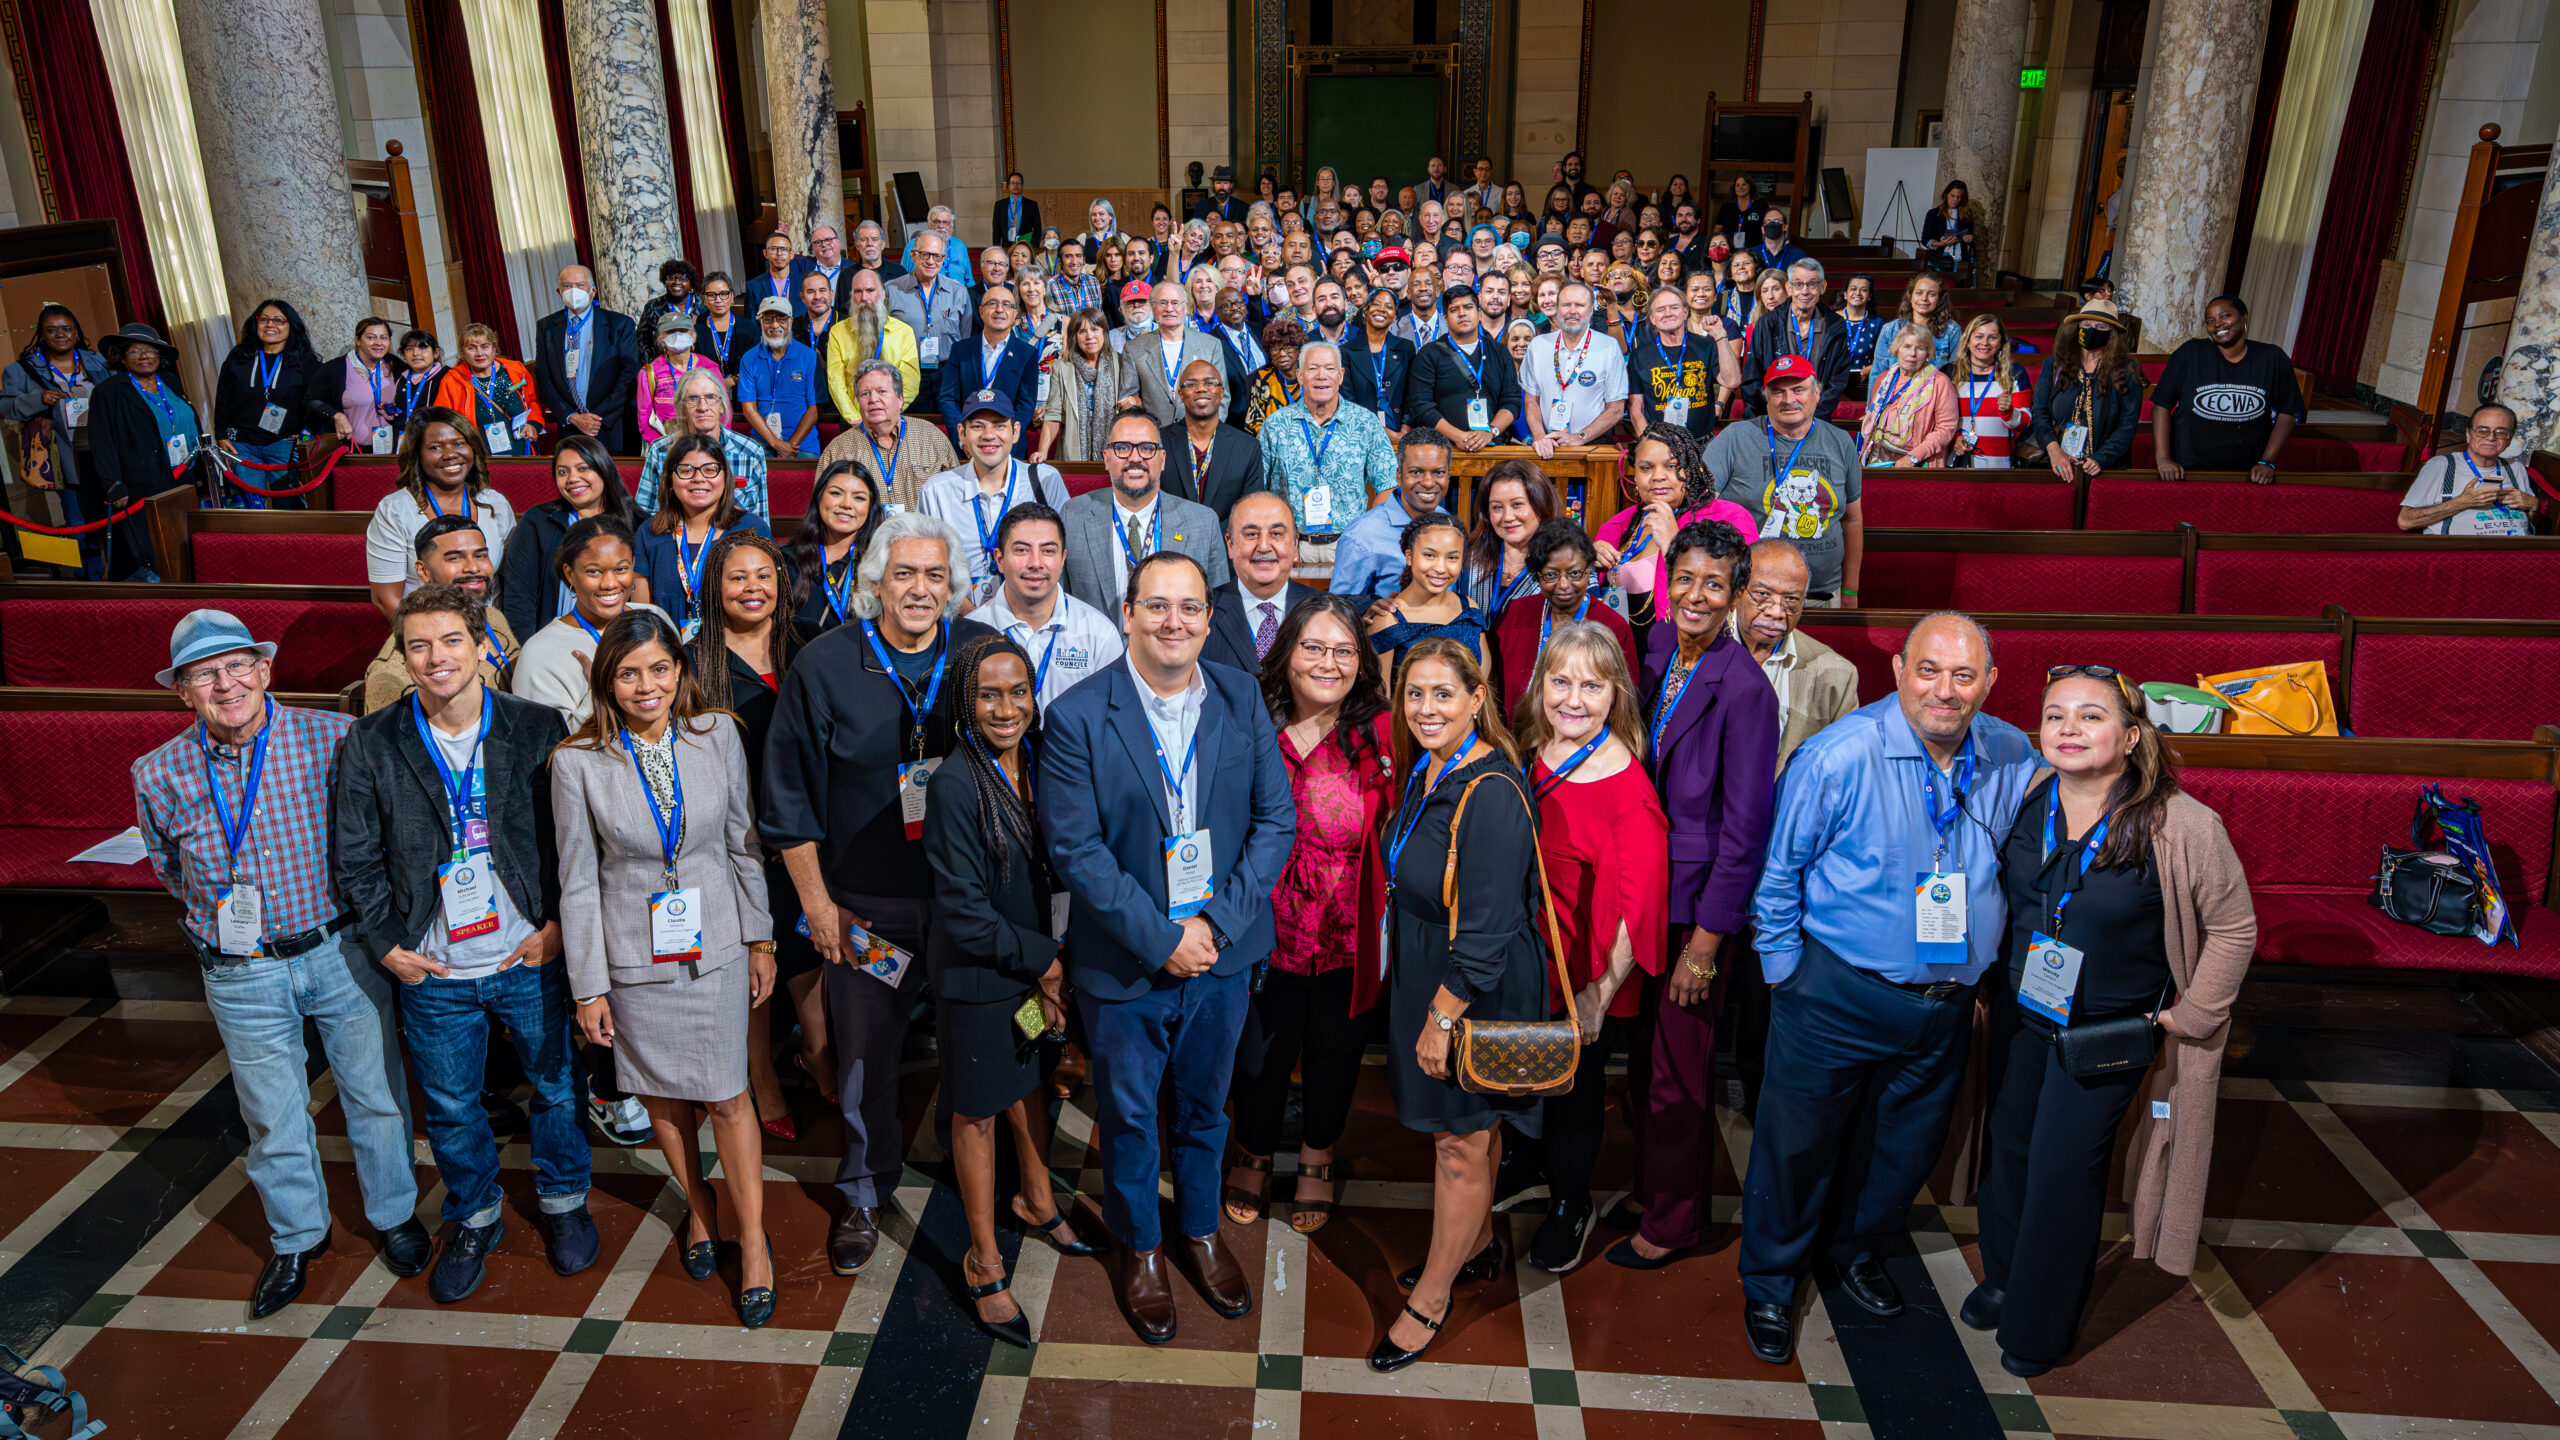 Members of all 99 Los Angeles Neighborhoods Councils at the annual Congress of Neighborhoods with City officials. (Photo by Chris Valle)